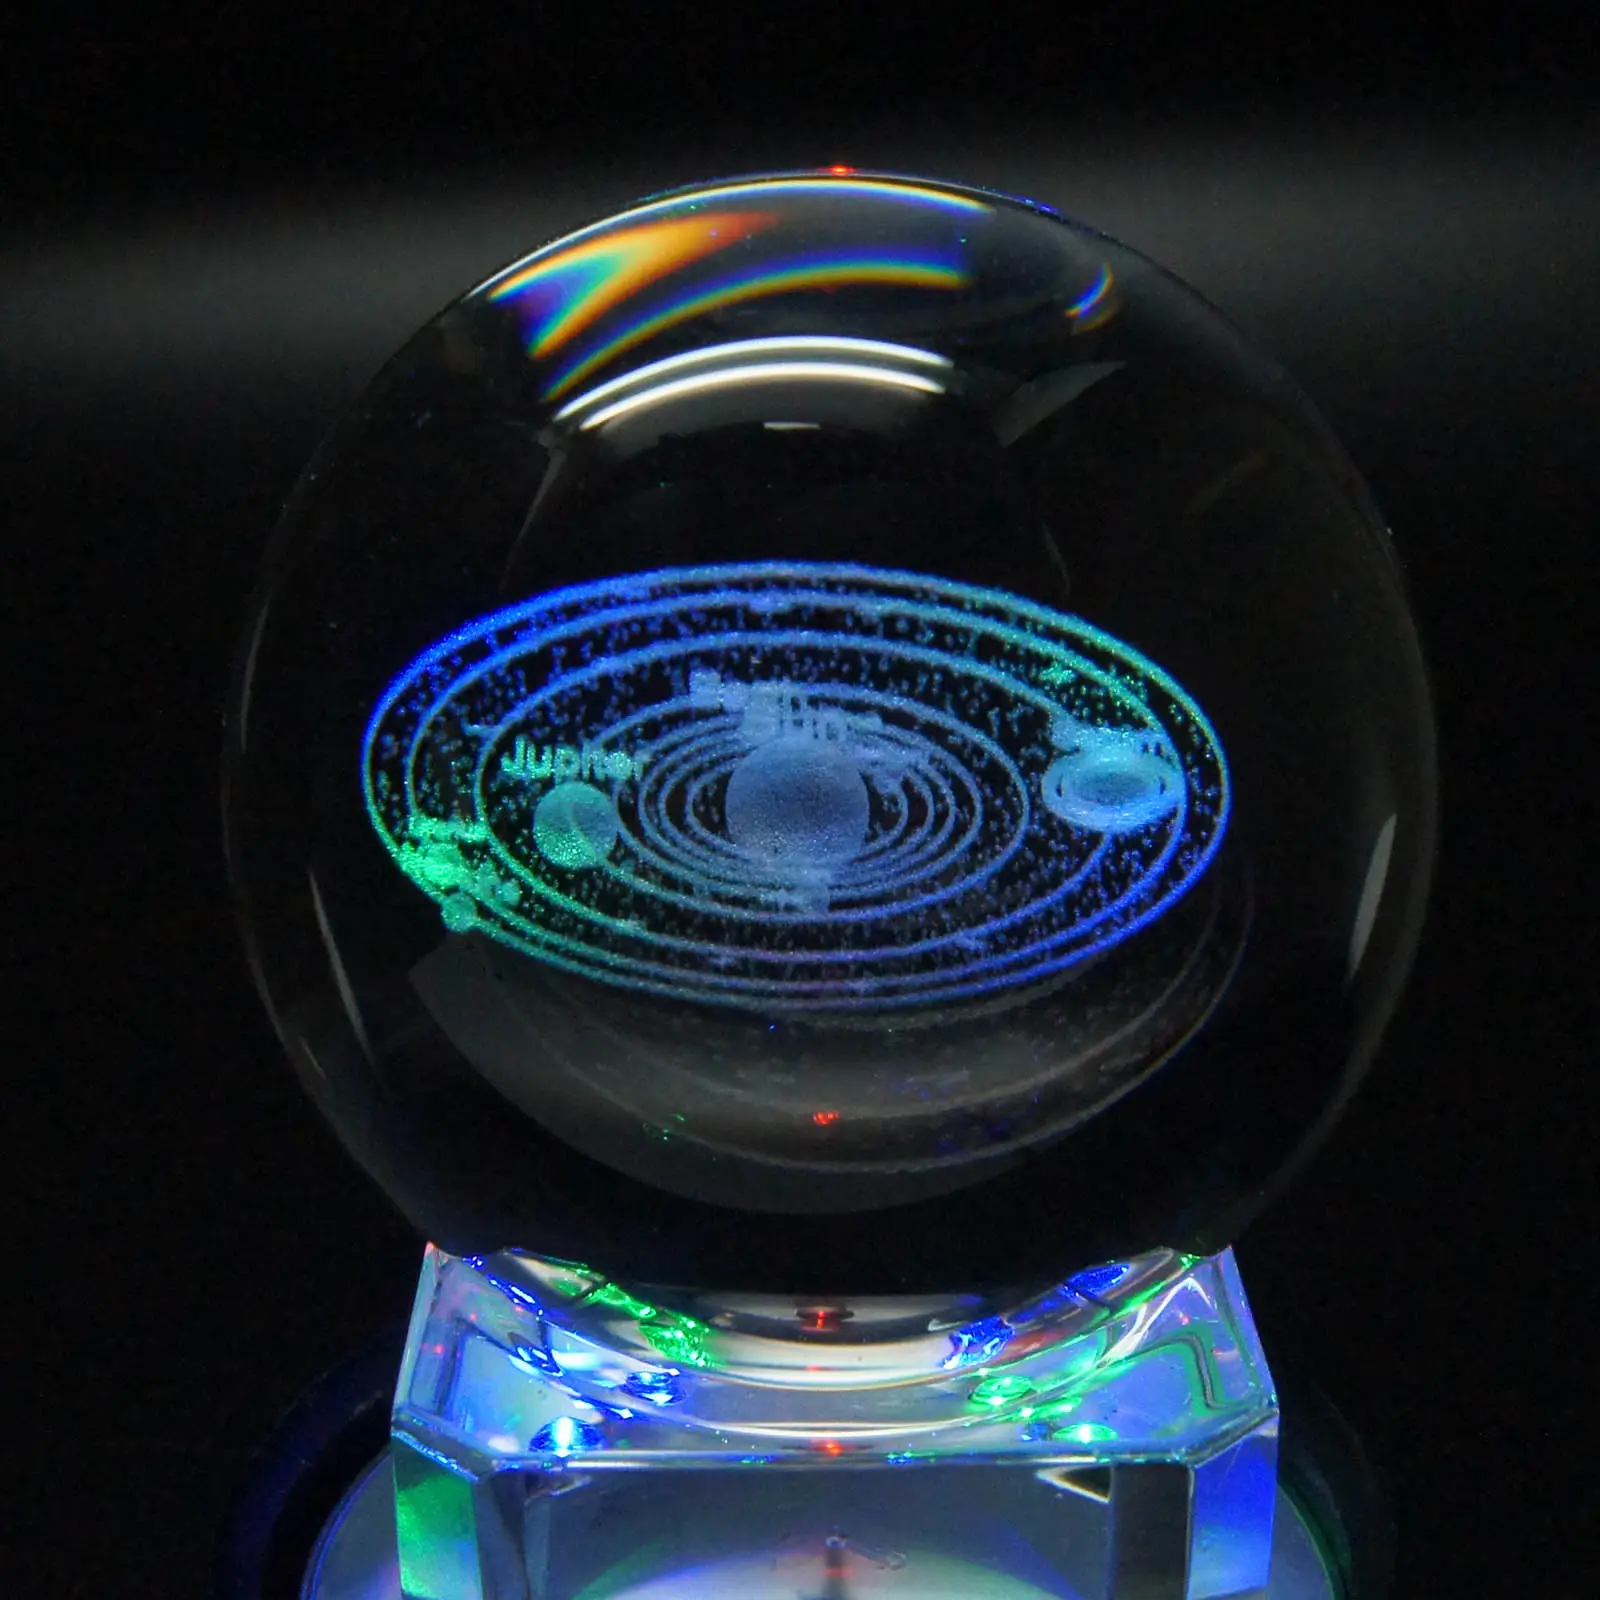 high quality large decorative islamic souvenir new year materials for crystal glass souvenirs mixed crystal ball sphere